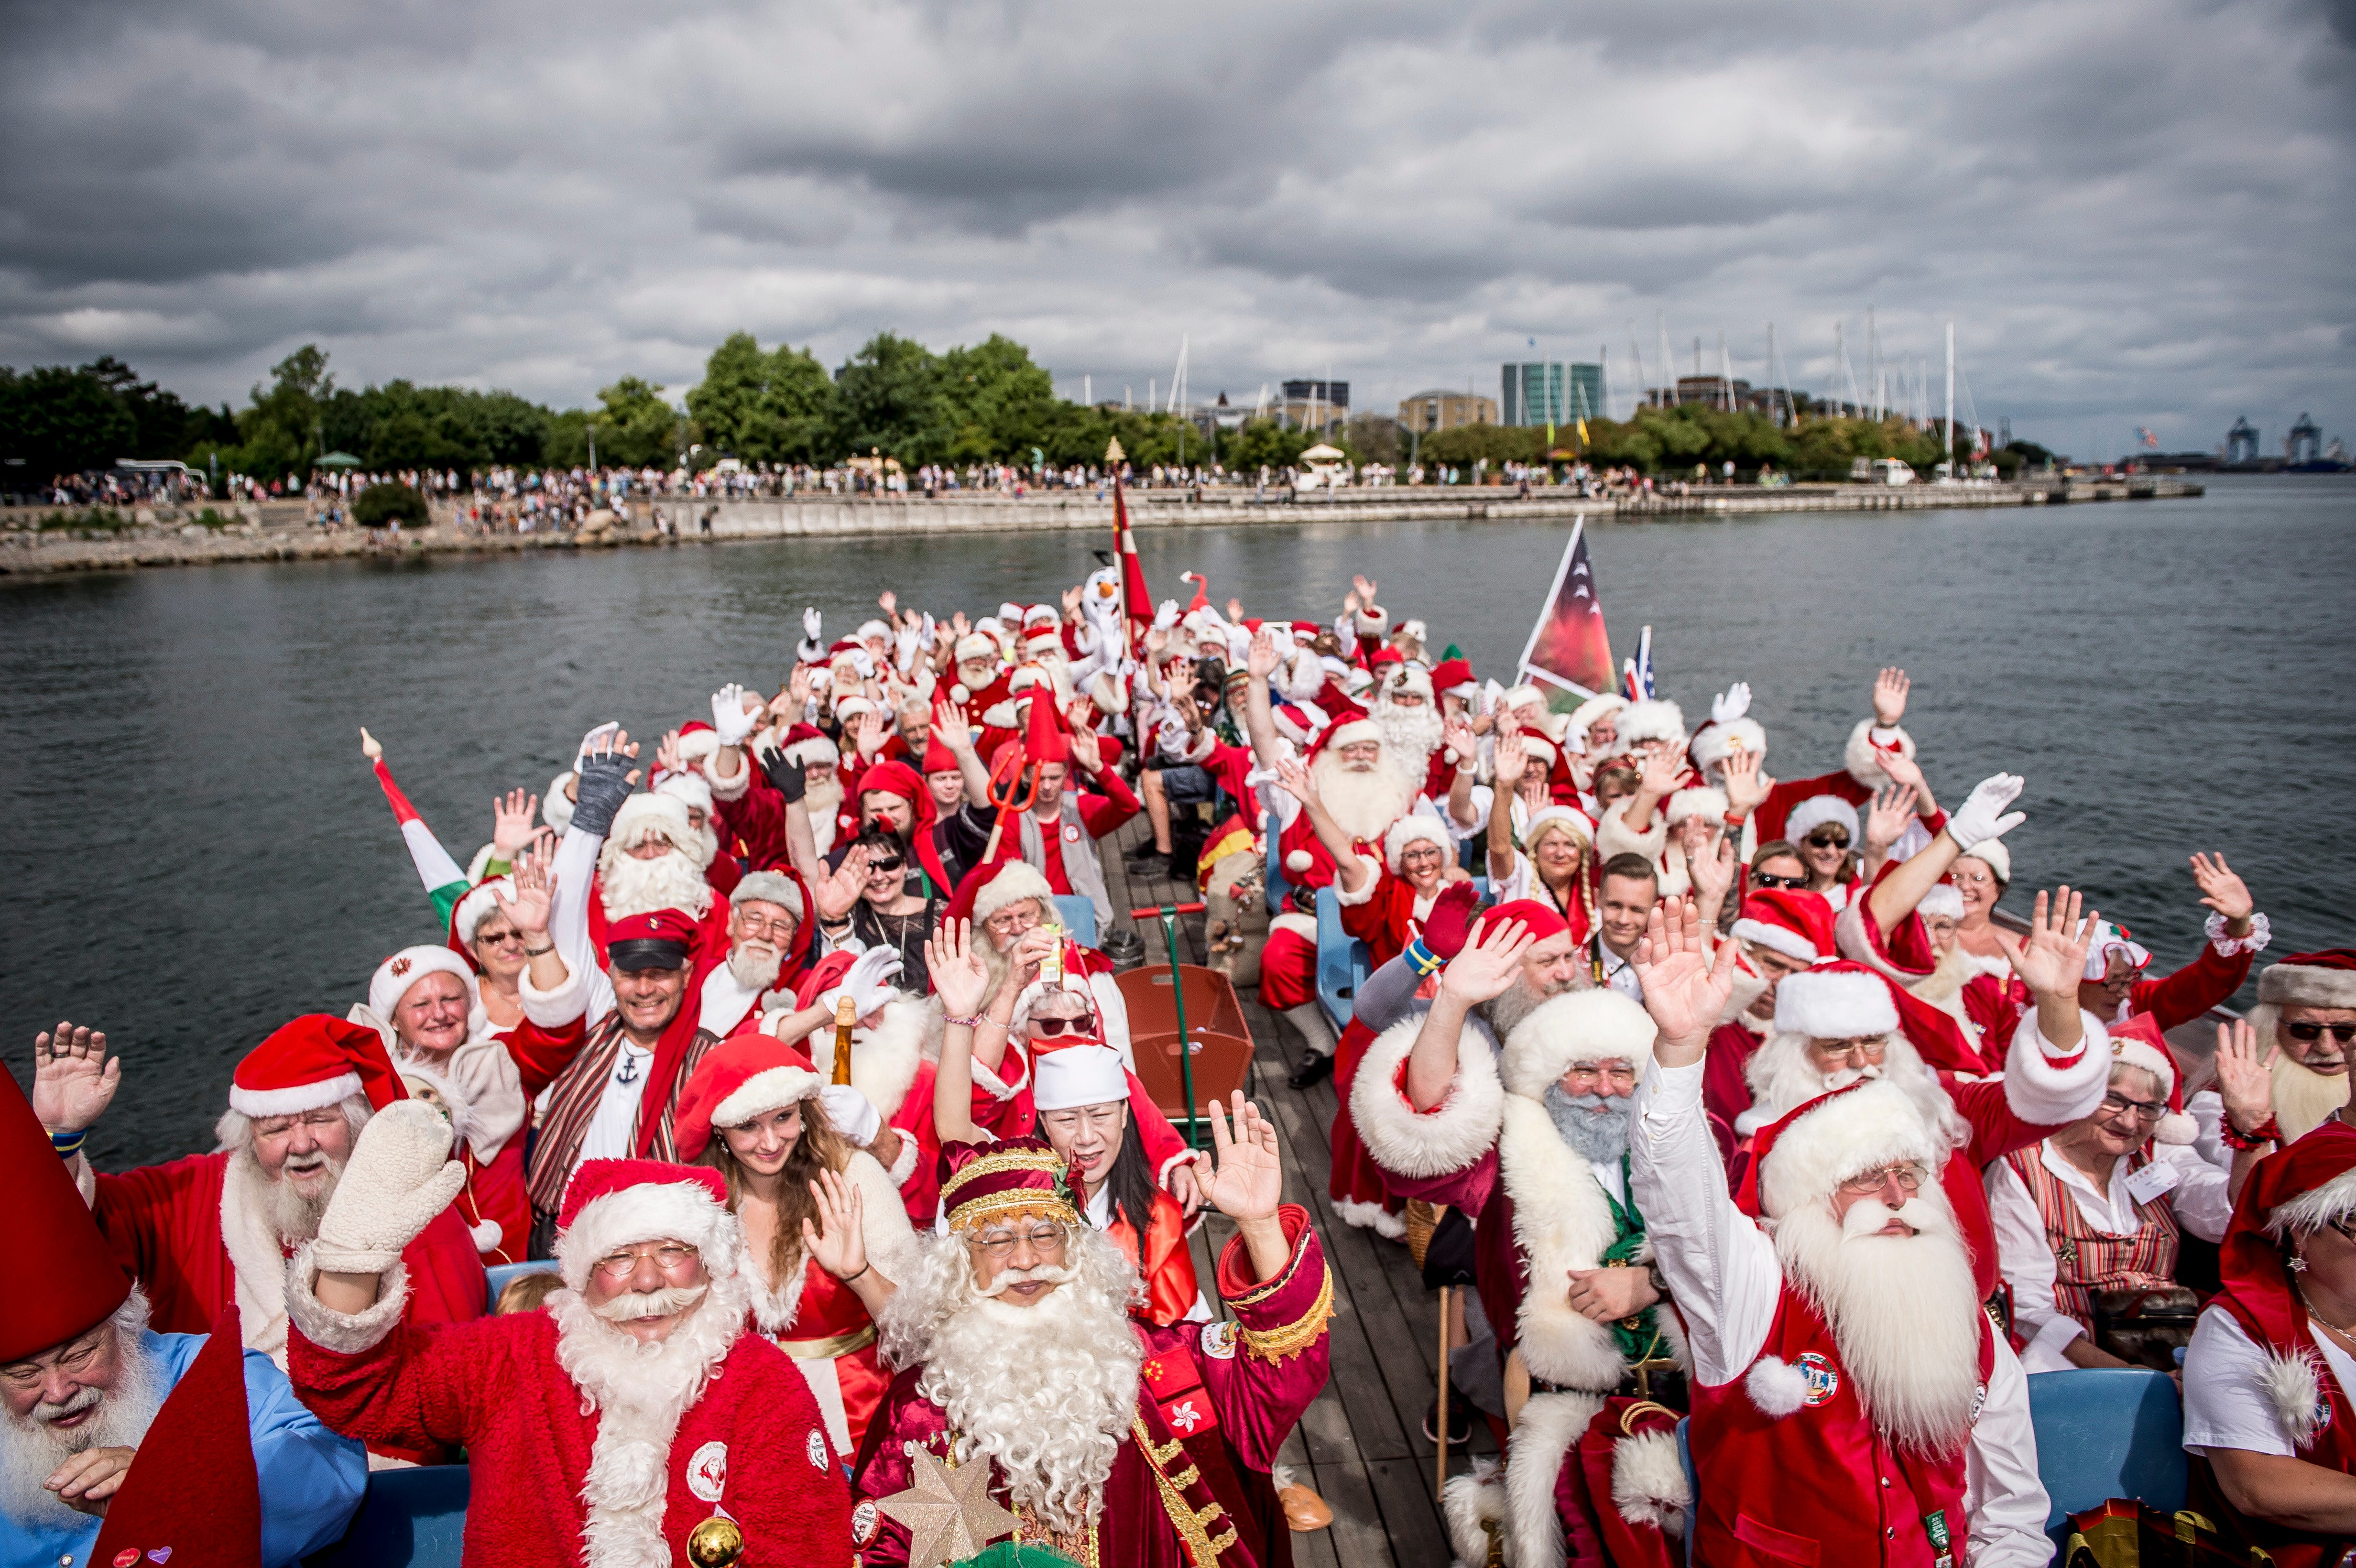 Participants wearing costumes attend the World Santa Claus Congress in Copenhagen, Denmark. The congress is an annual event held every summer in the Danish capital. Around 130 Santas, santas wives and elves meet to celebrate Christmas in July.